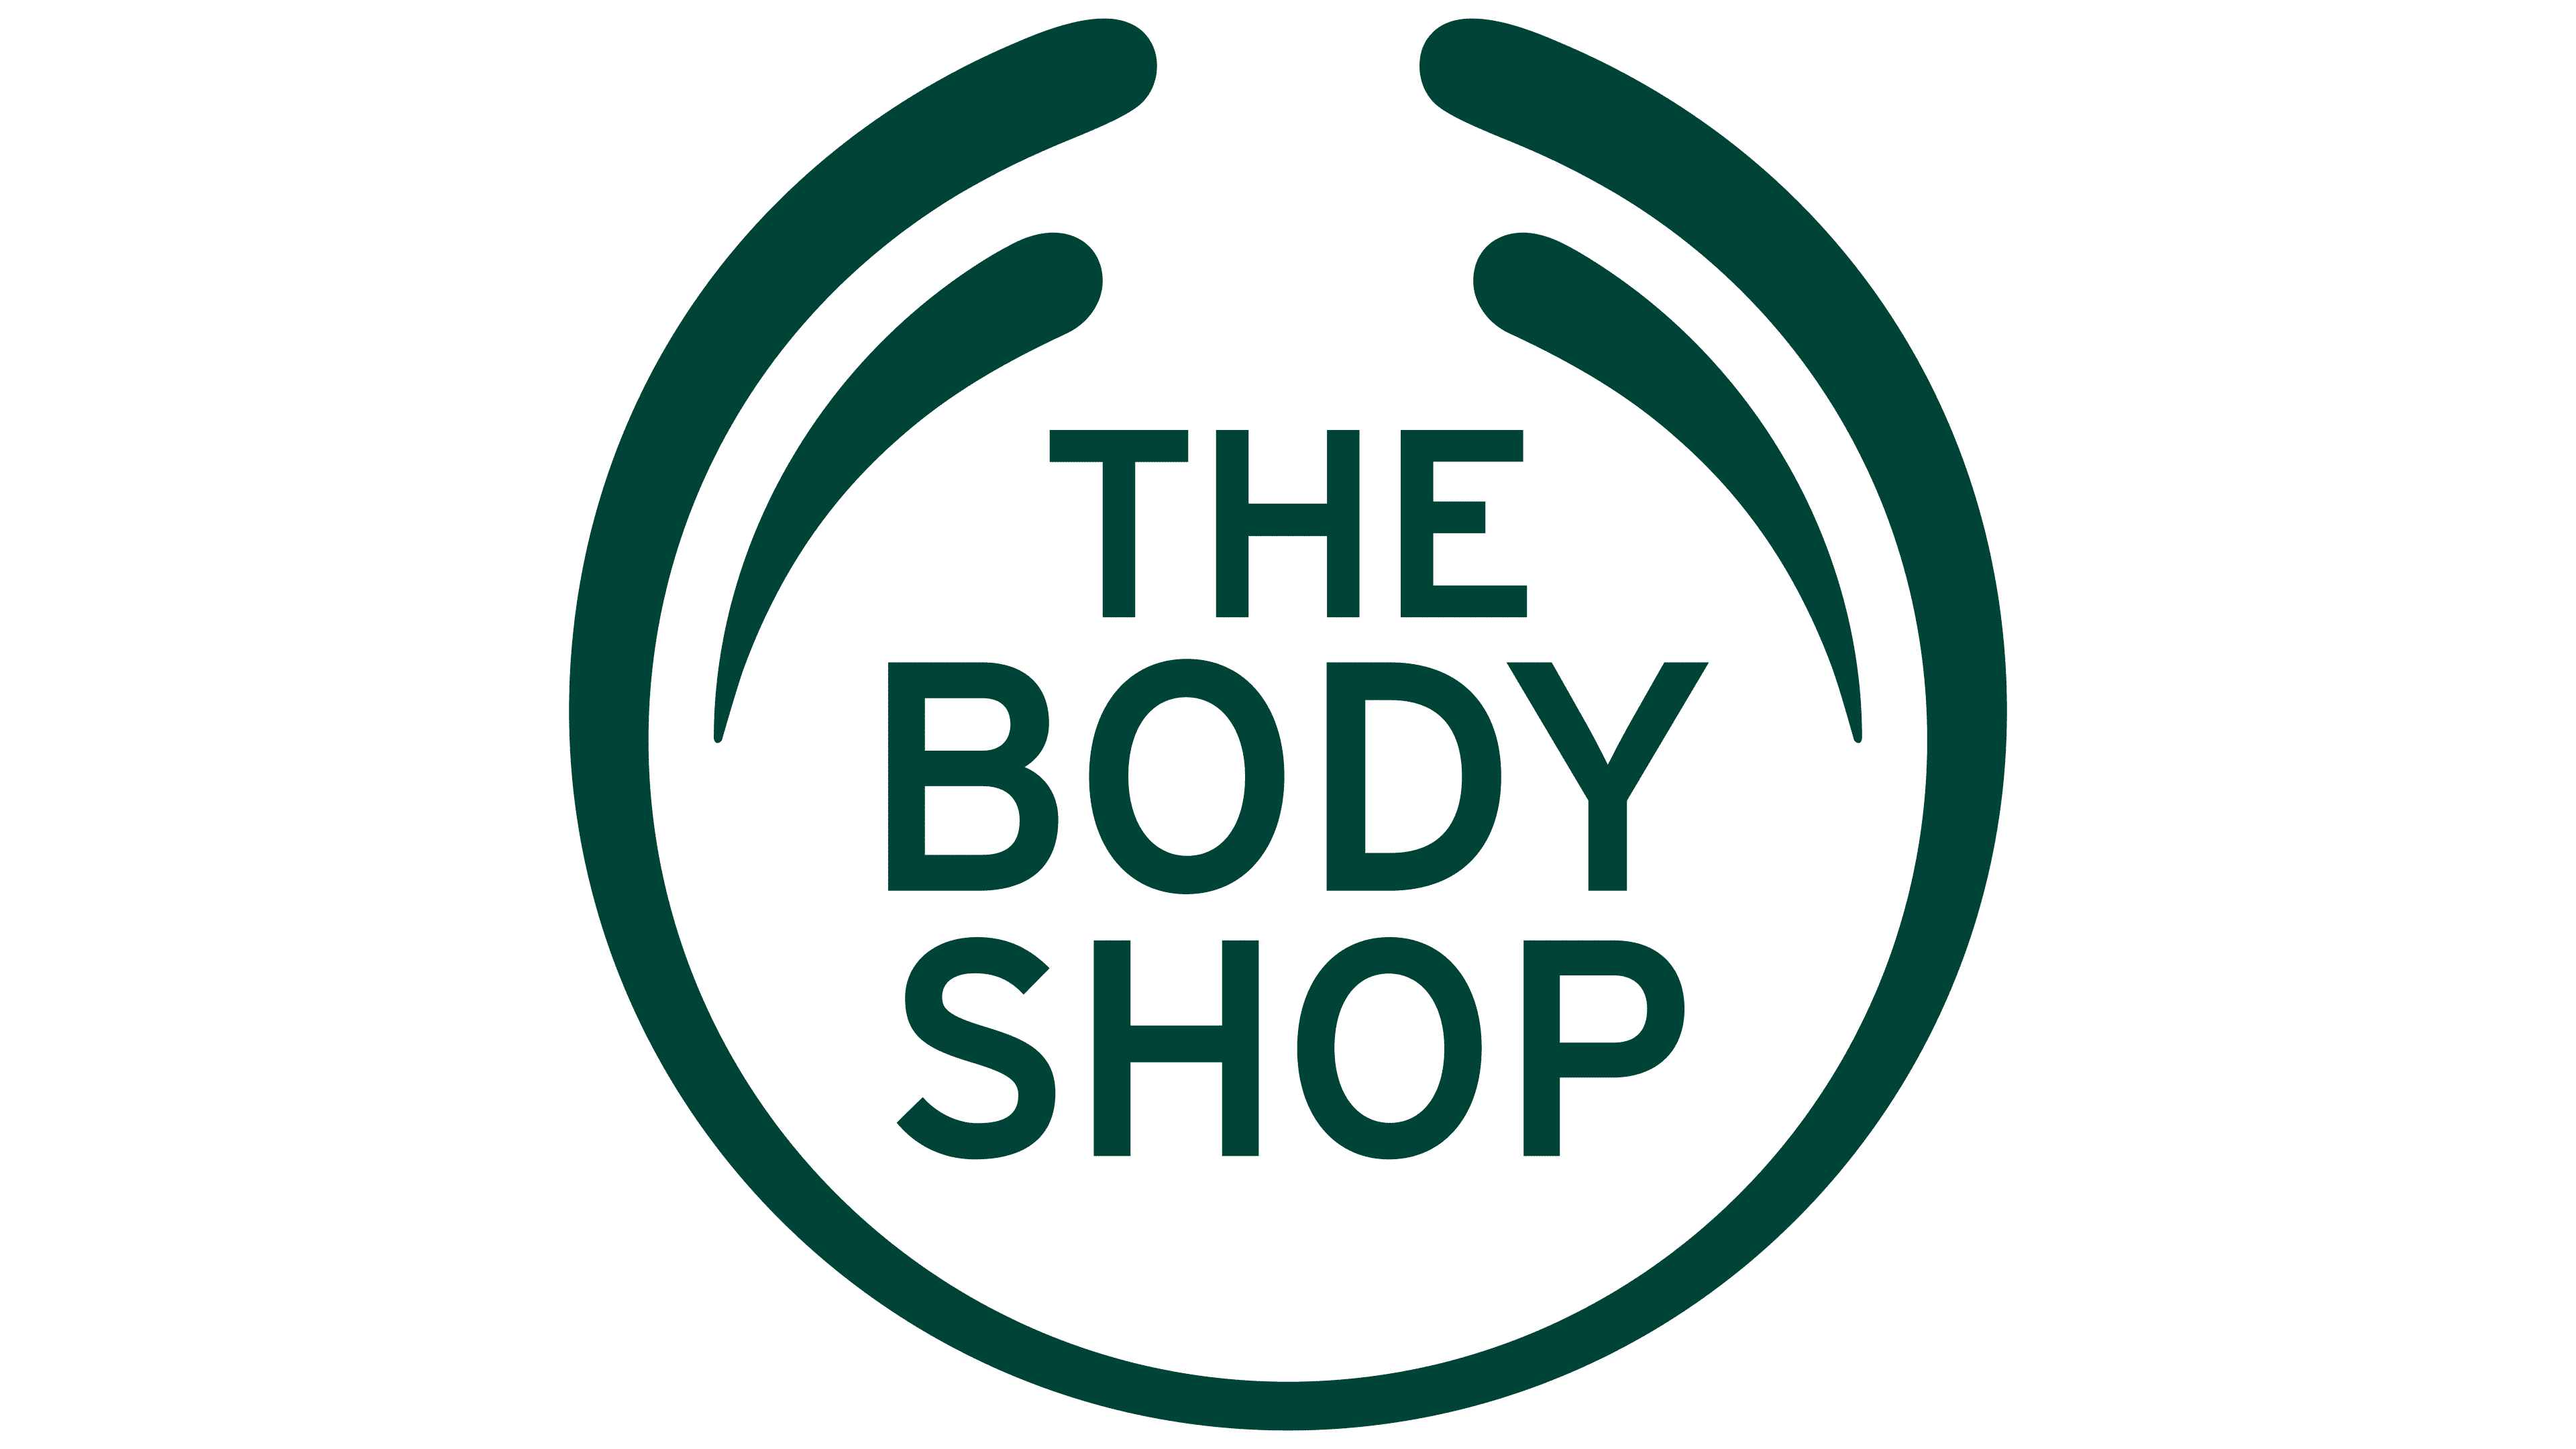 The Body Shop - Get a FREE Vitamin C Kit with Orders Over £39!